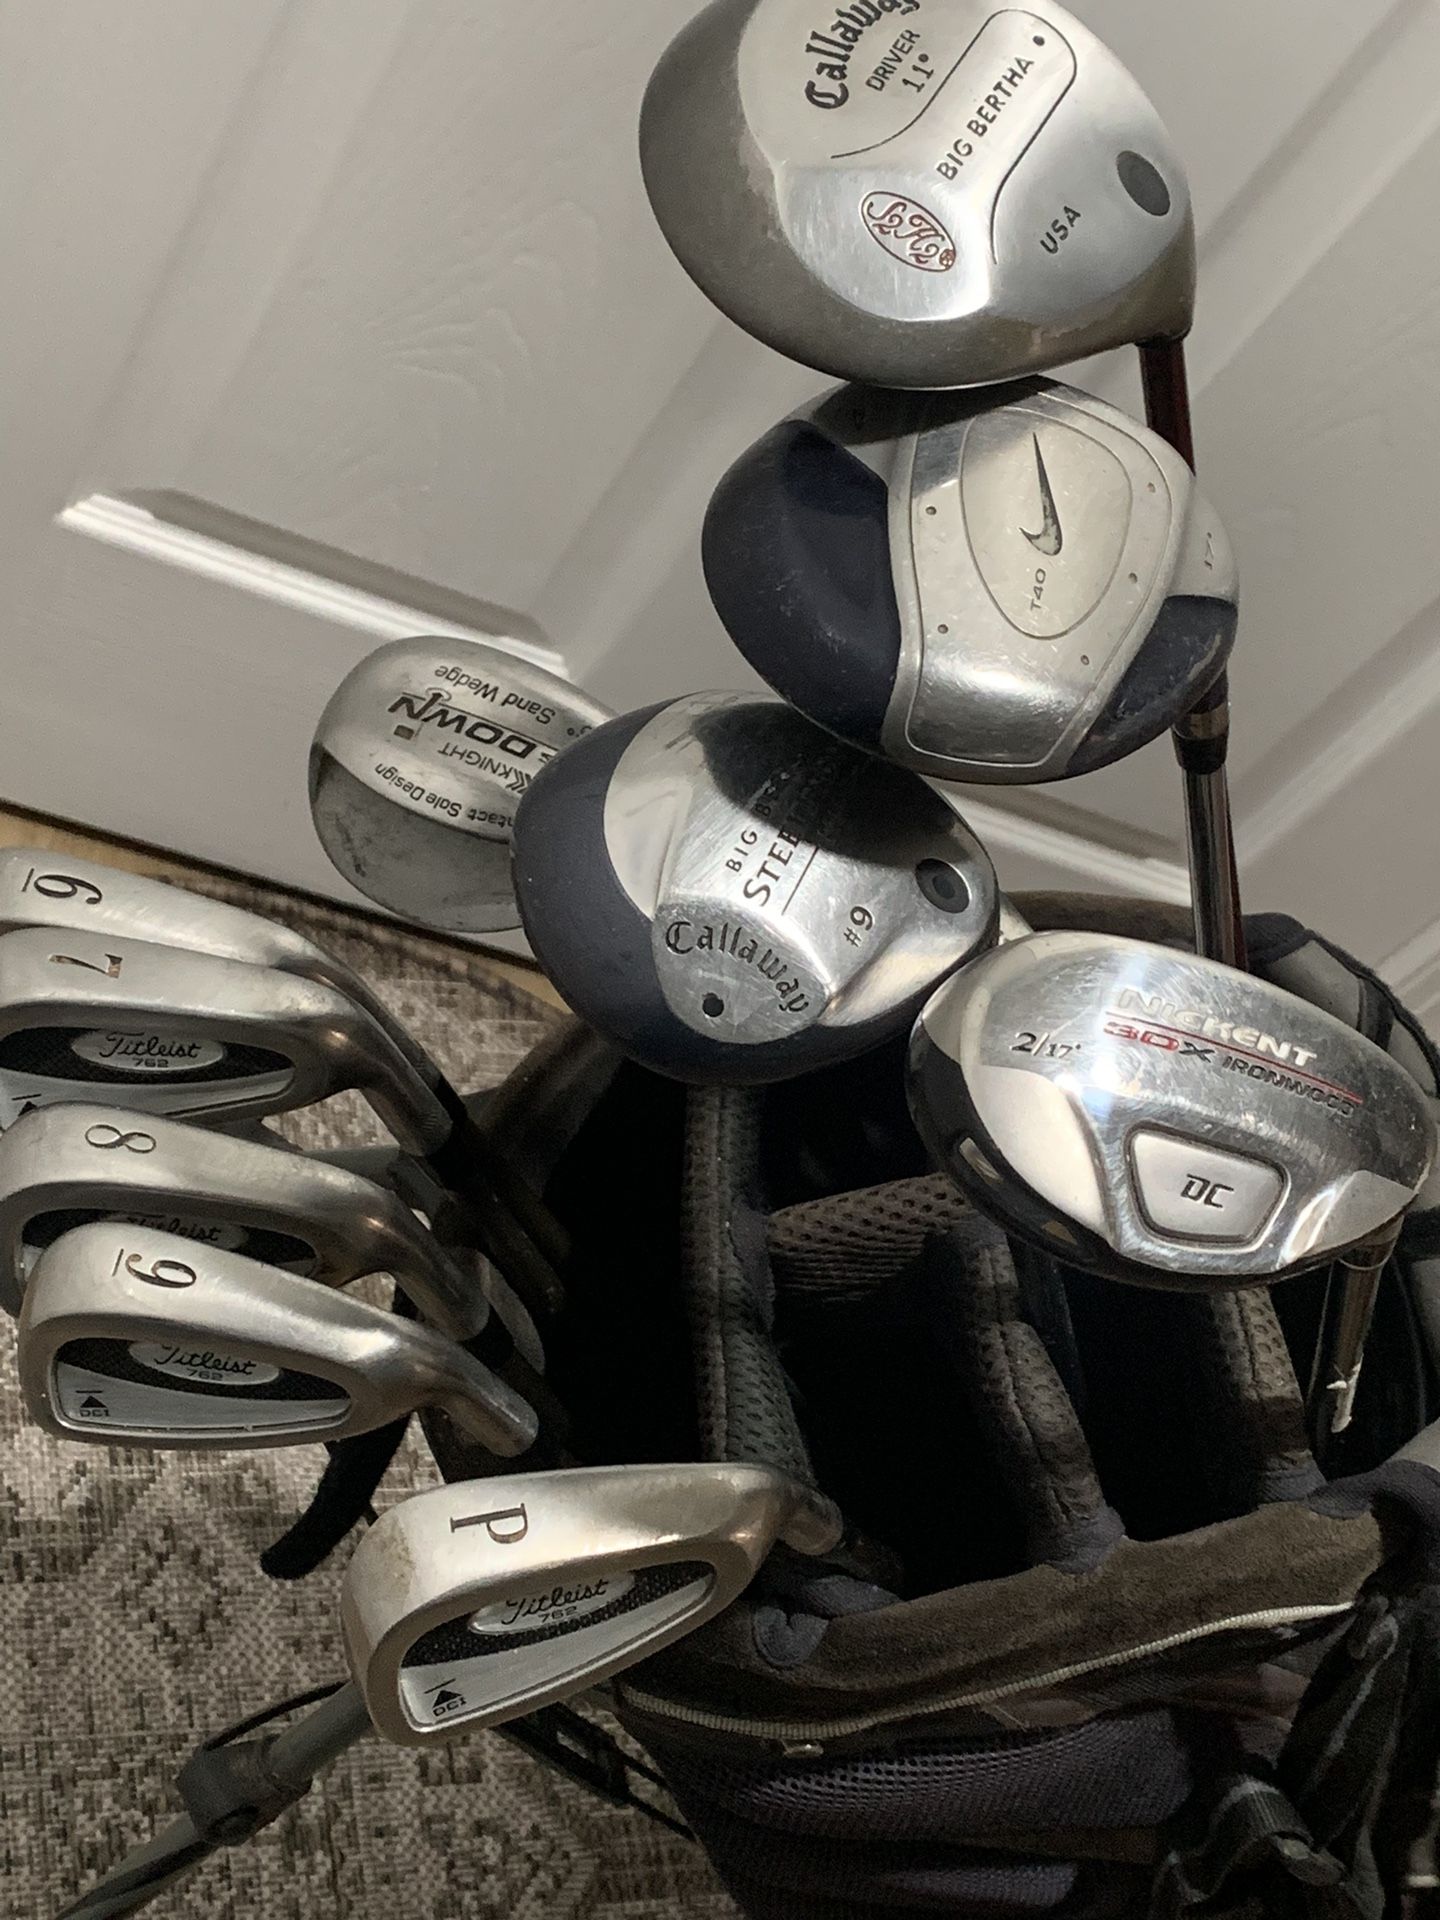 Titleist, Callaway, golf club set and more